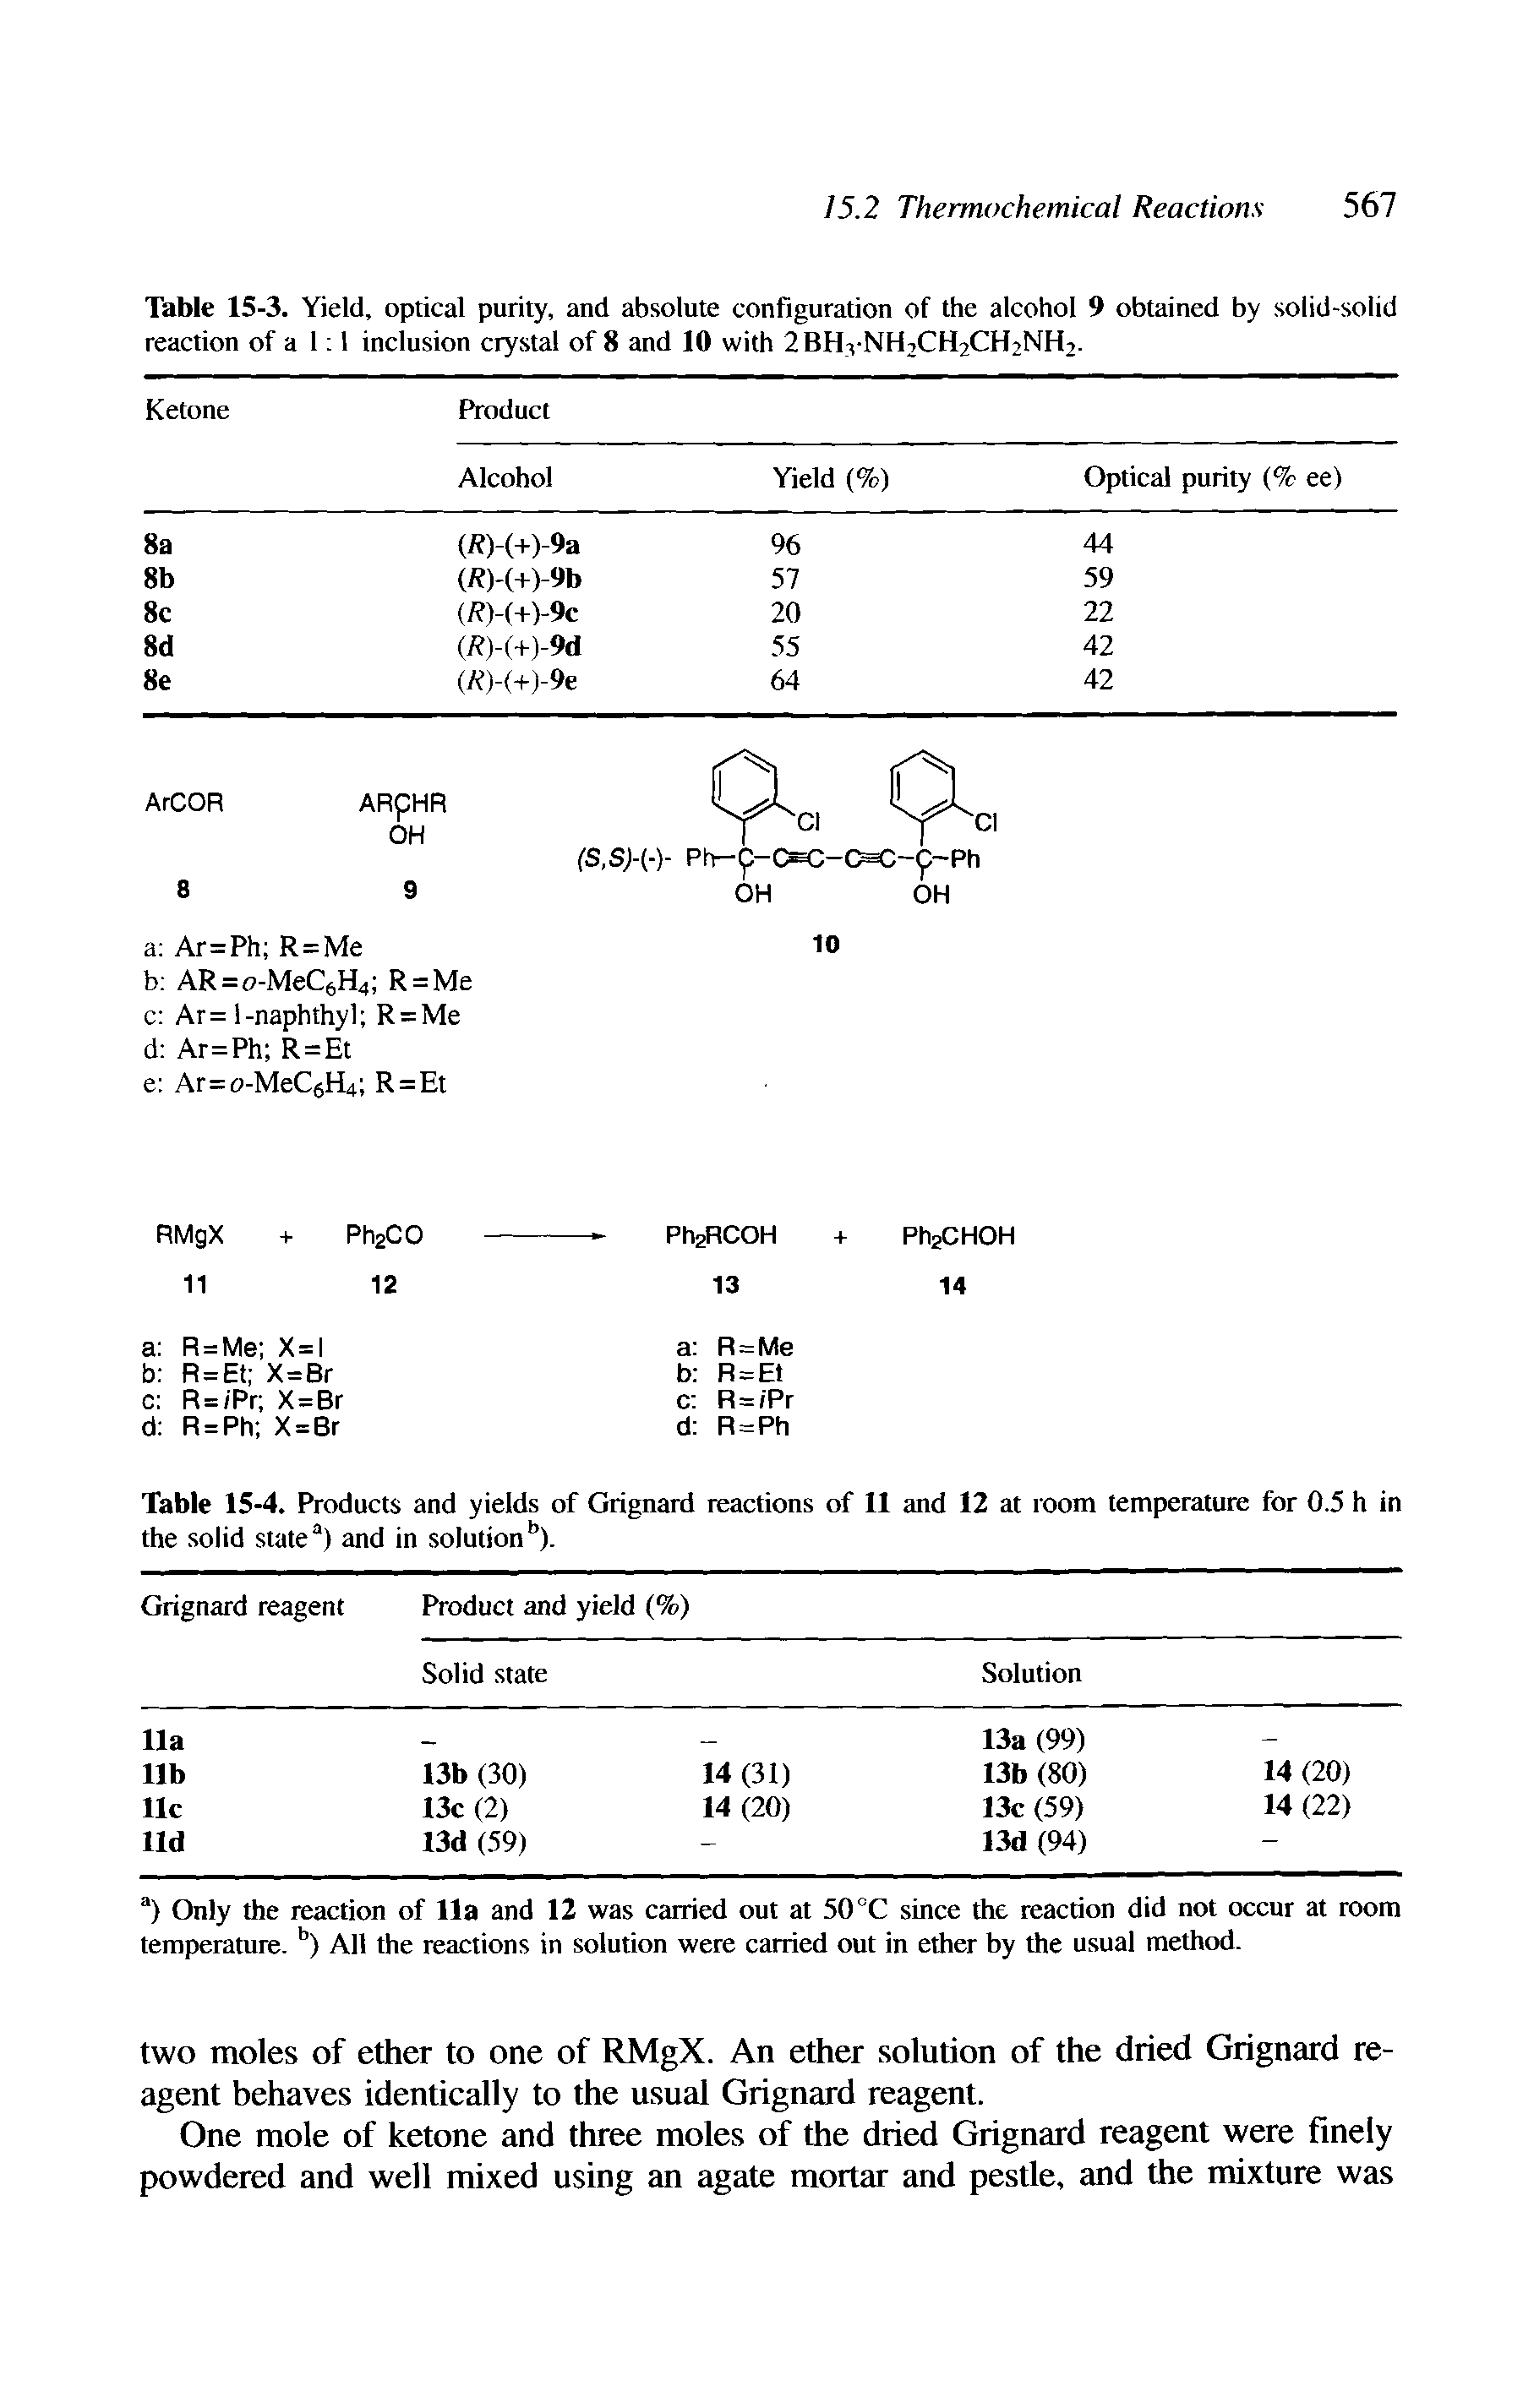 Table 15-3. Yield, optical purity, and absolute configuration of the alcohol 9 obtained by solid-solid reaction of a 1 1 inclusion crystal of 8 and 10 with 2BHrNH2CH2CH2NH2.